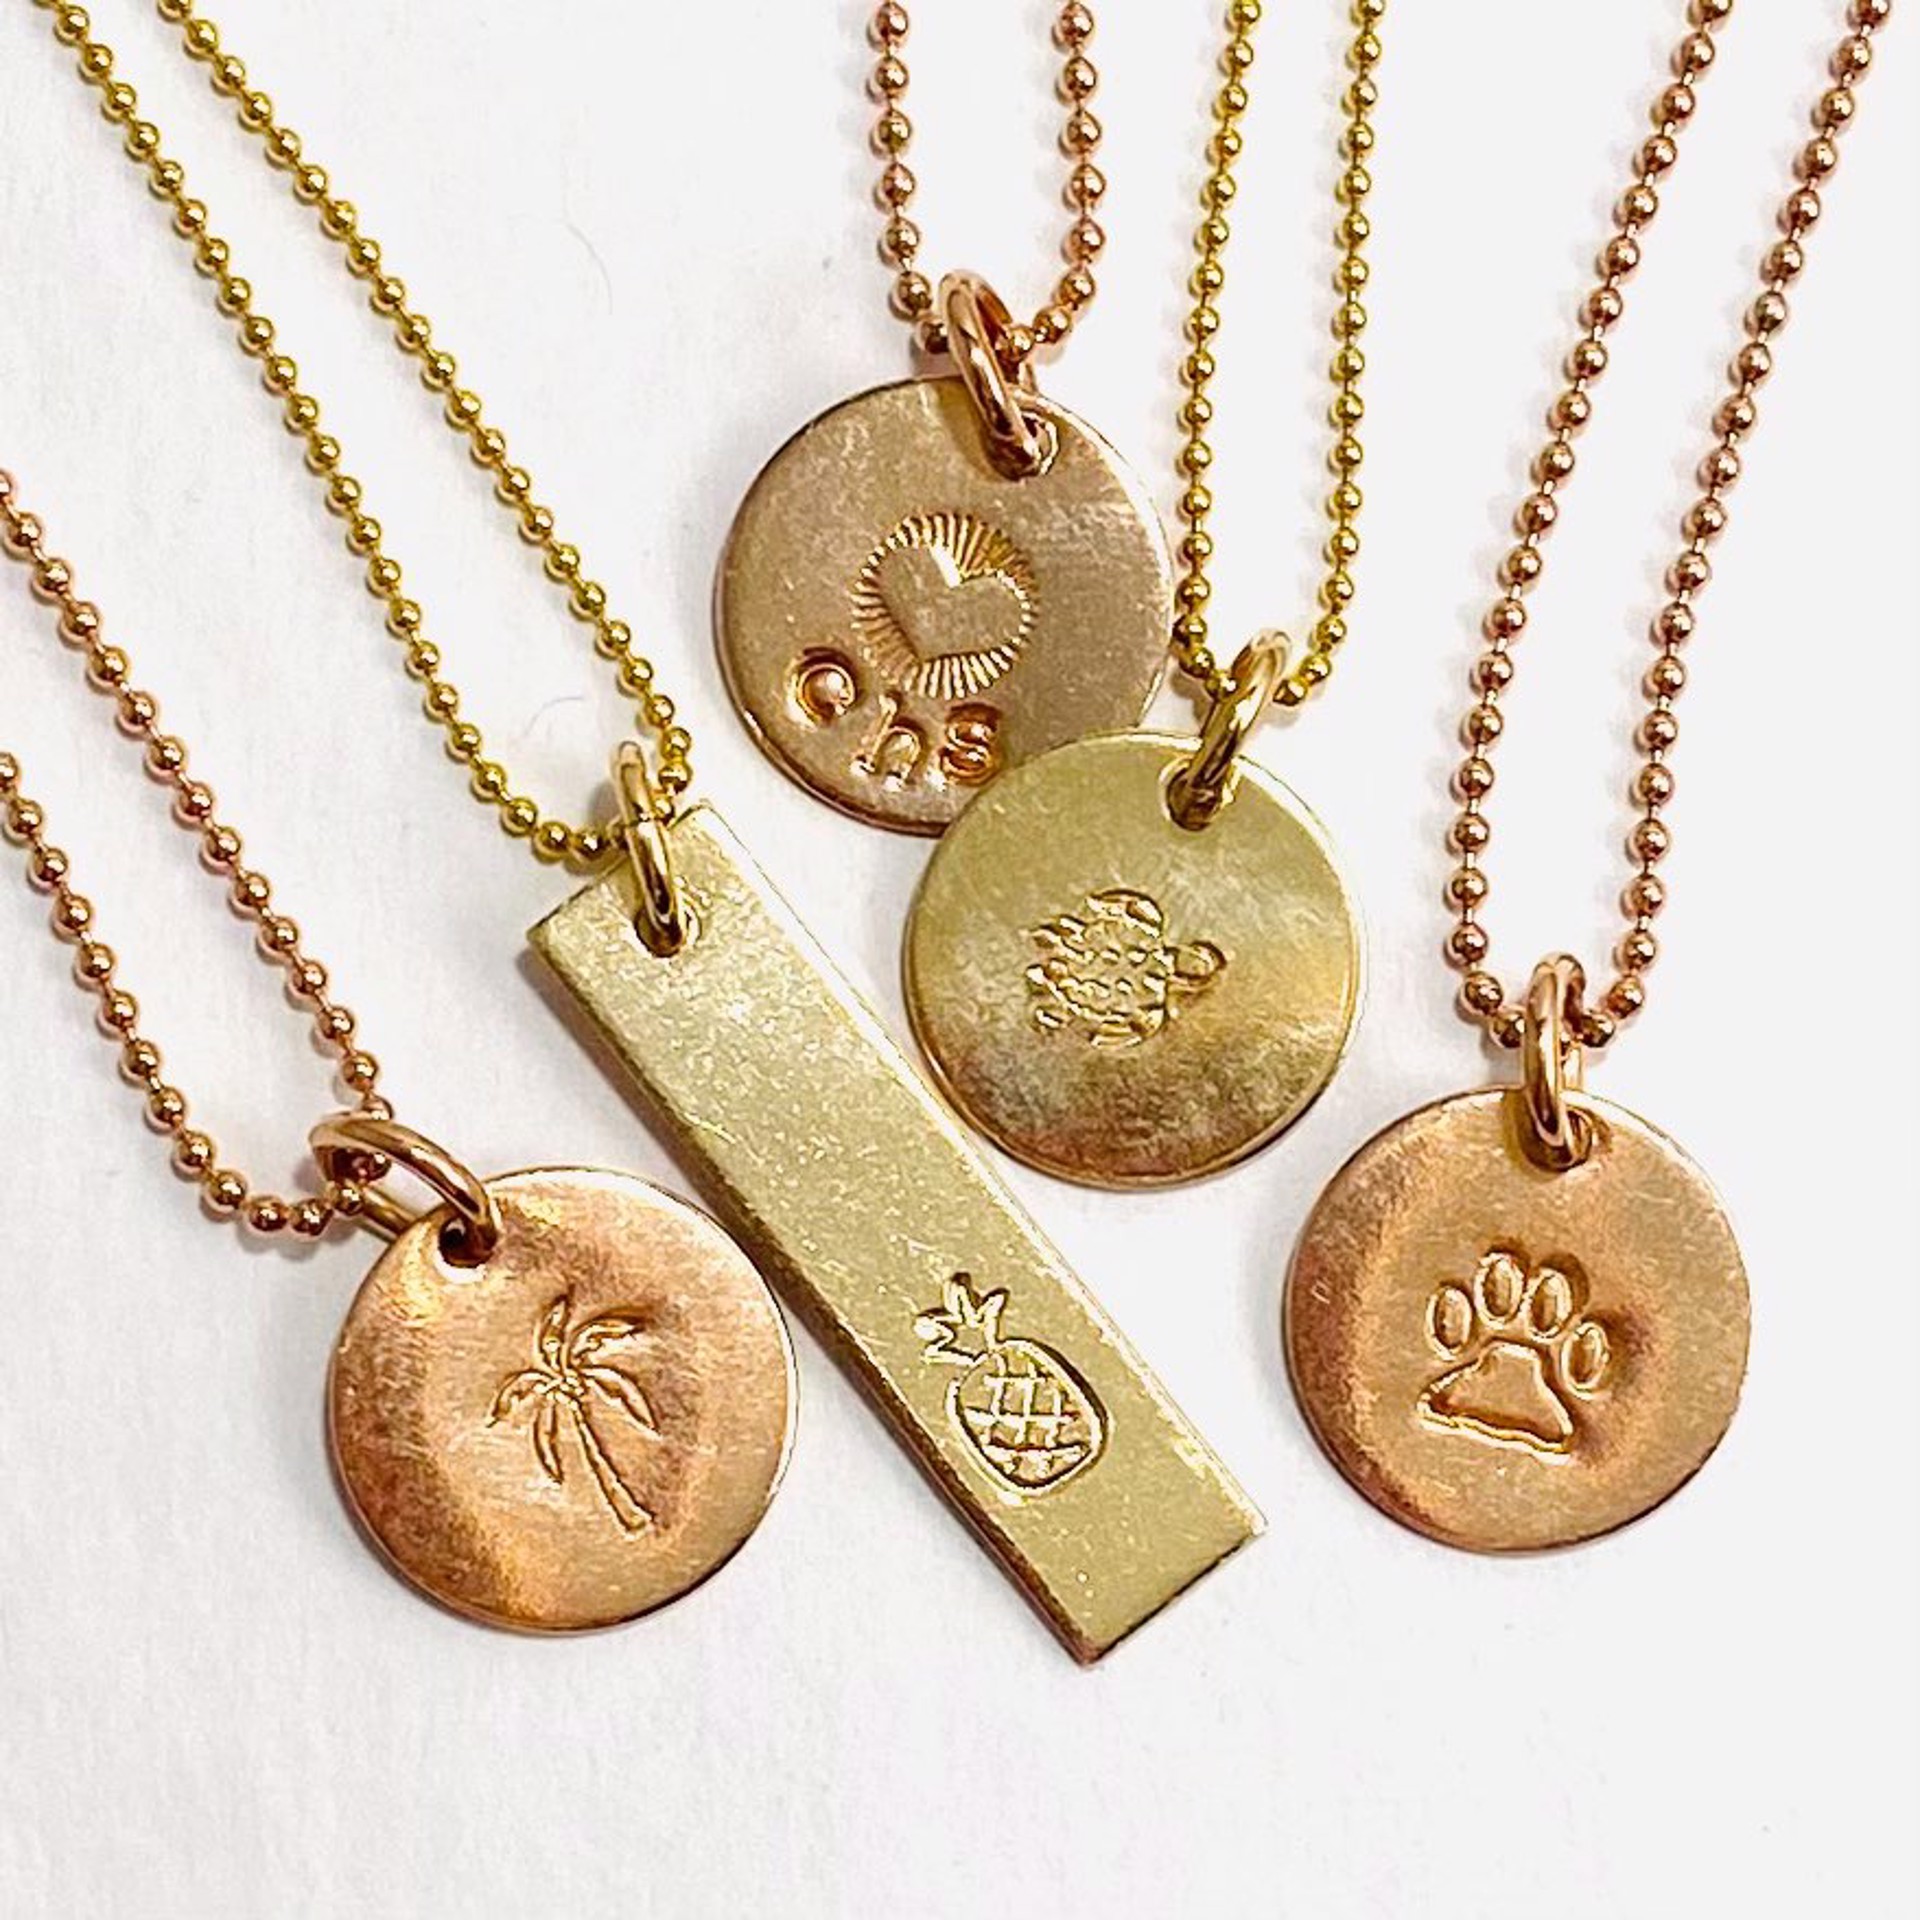 SL22 GF Stamped Pendant on Chain Necklace Various by Shelby Lee - jewelry